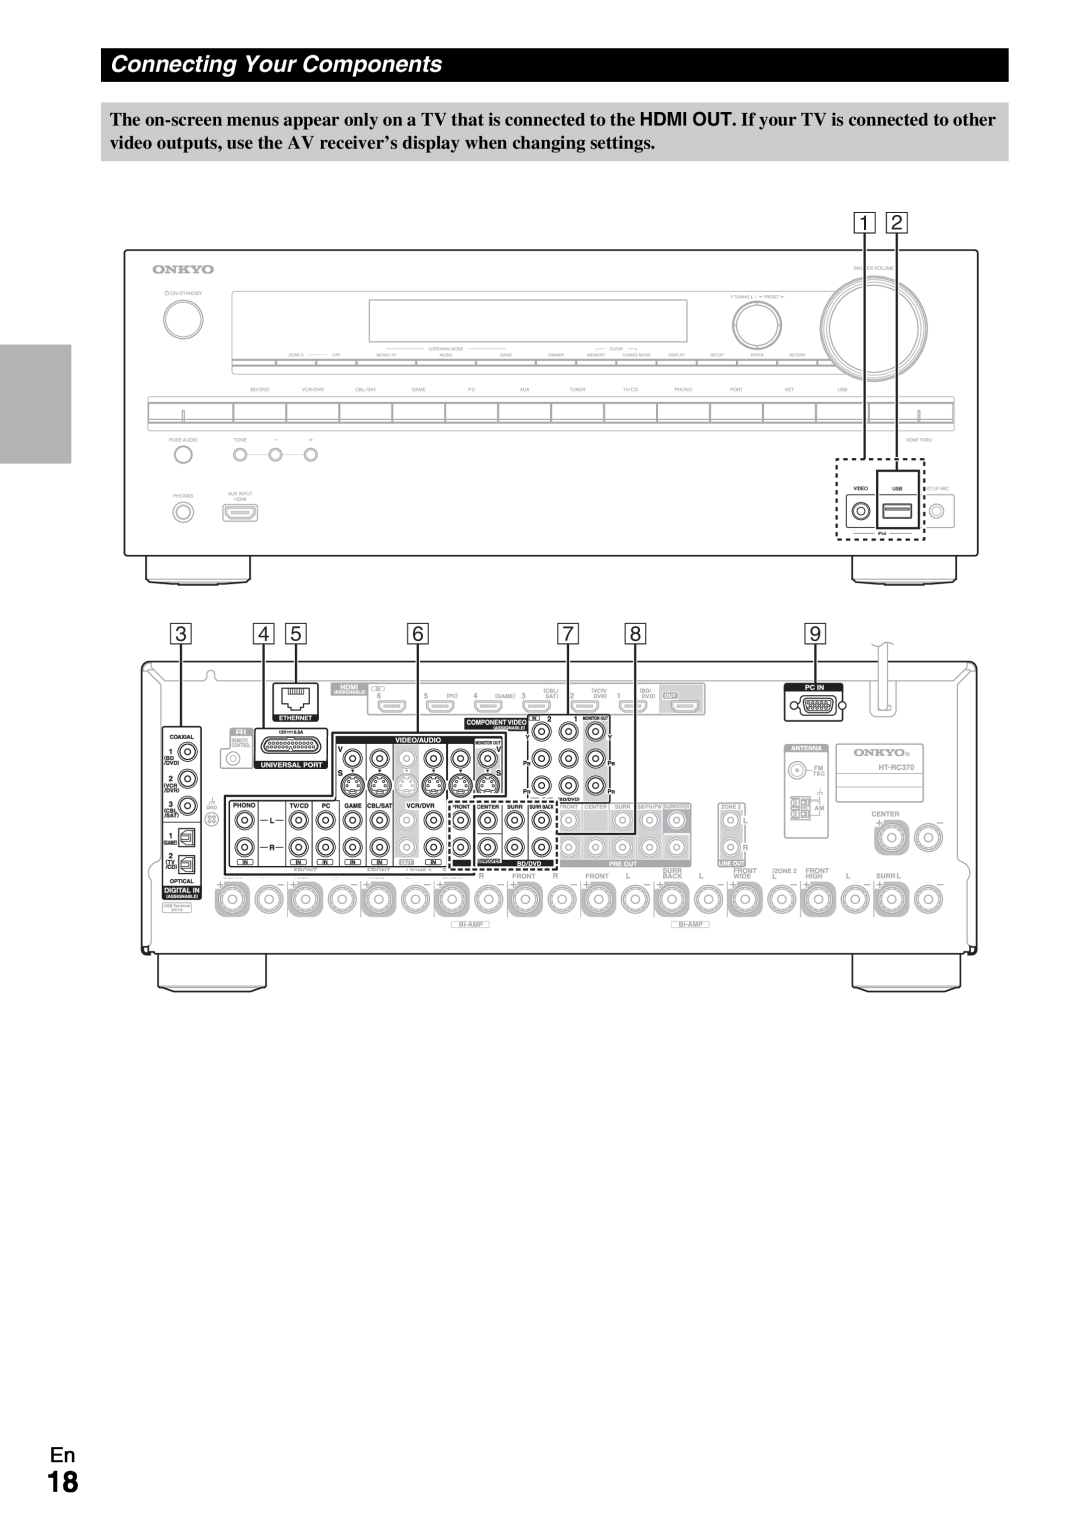 Onkyo HT-RC370 instruction manual Connecting Your Components, A B C D E F G H 